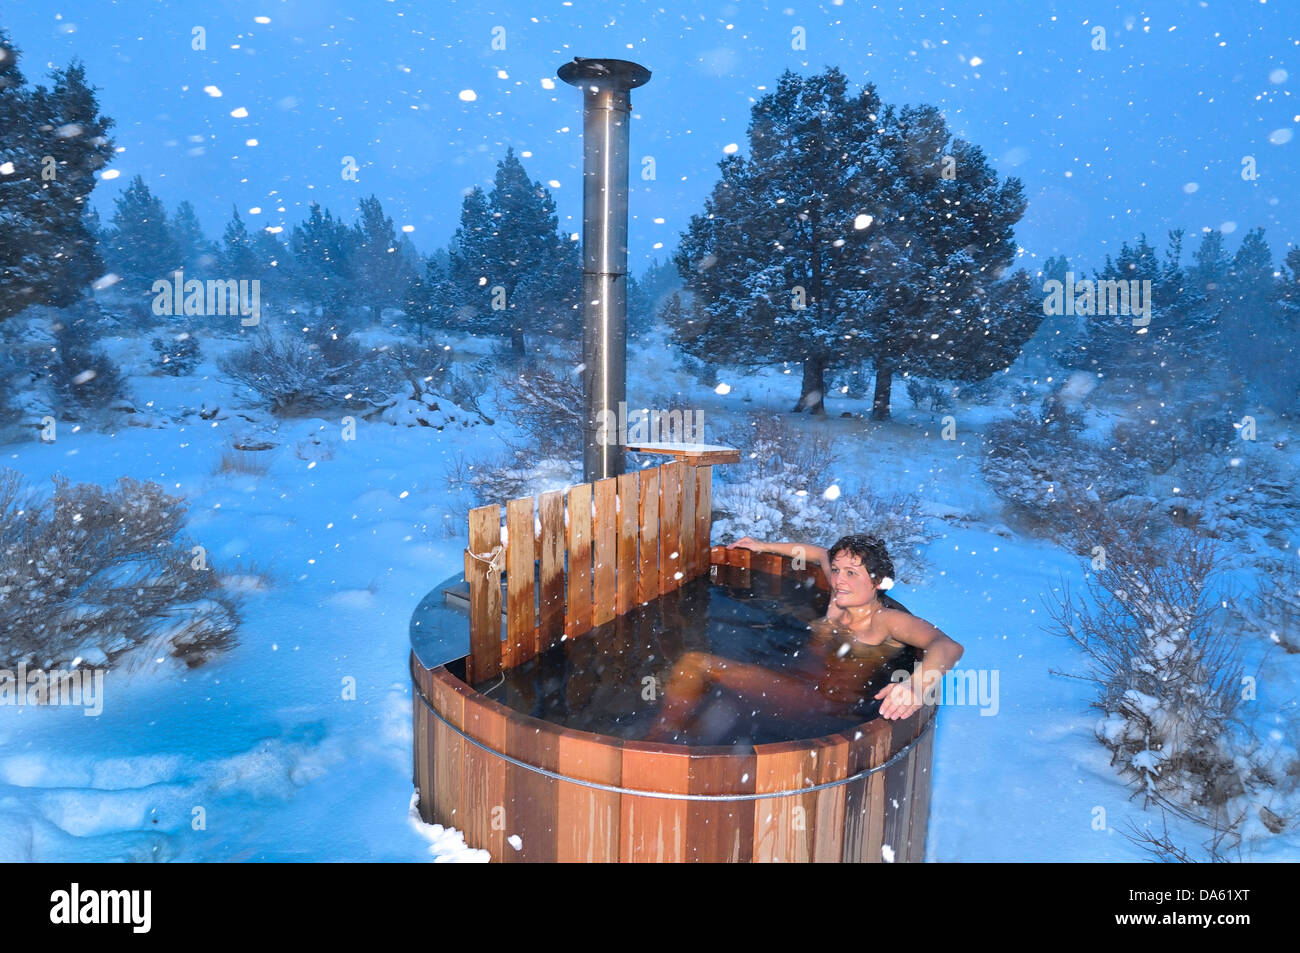 Woman, wood fired, hot tub, snow, winter, snowing, Central Oregon, USA, United States, America, Oregon, relax, wellness Stock Photo